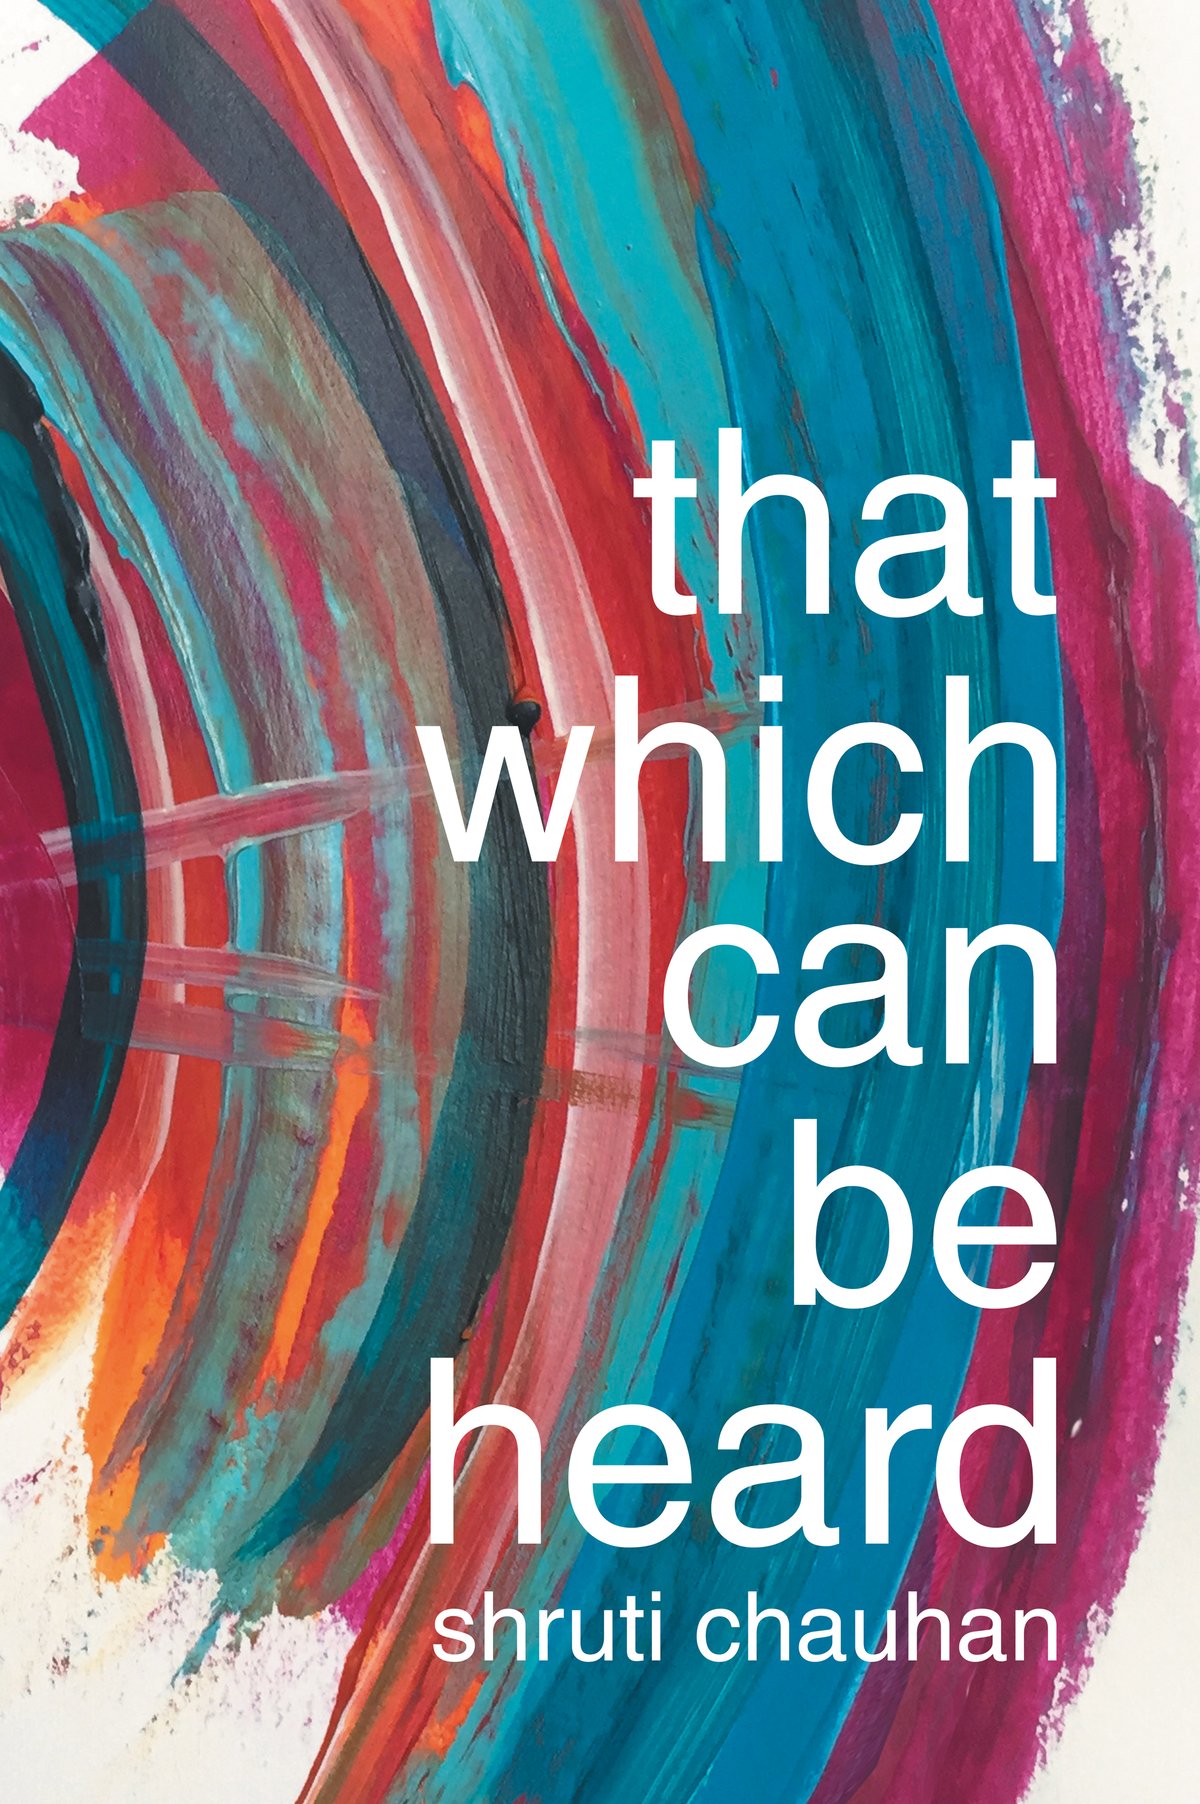 Image of That Which Can Be Heard by Shruti Chauhan